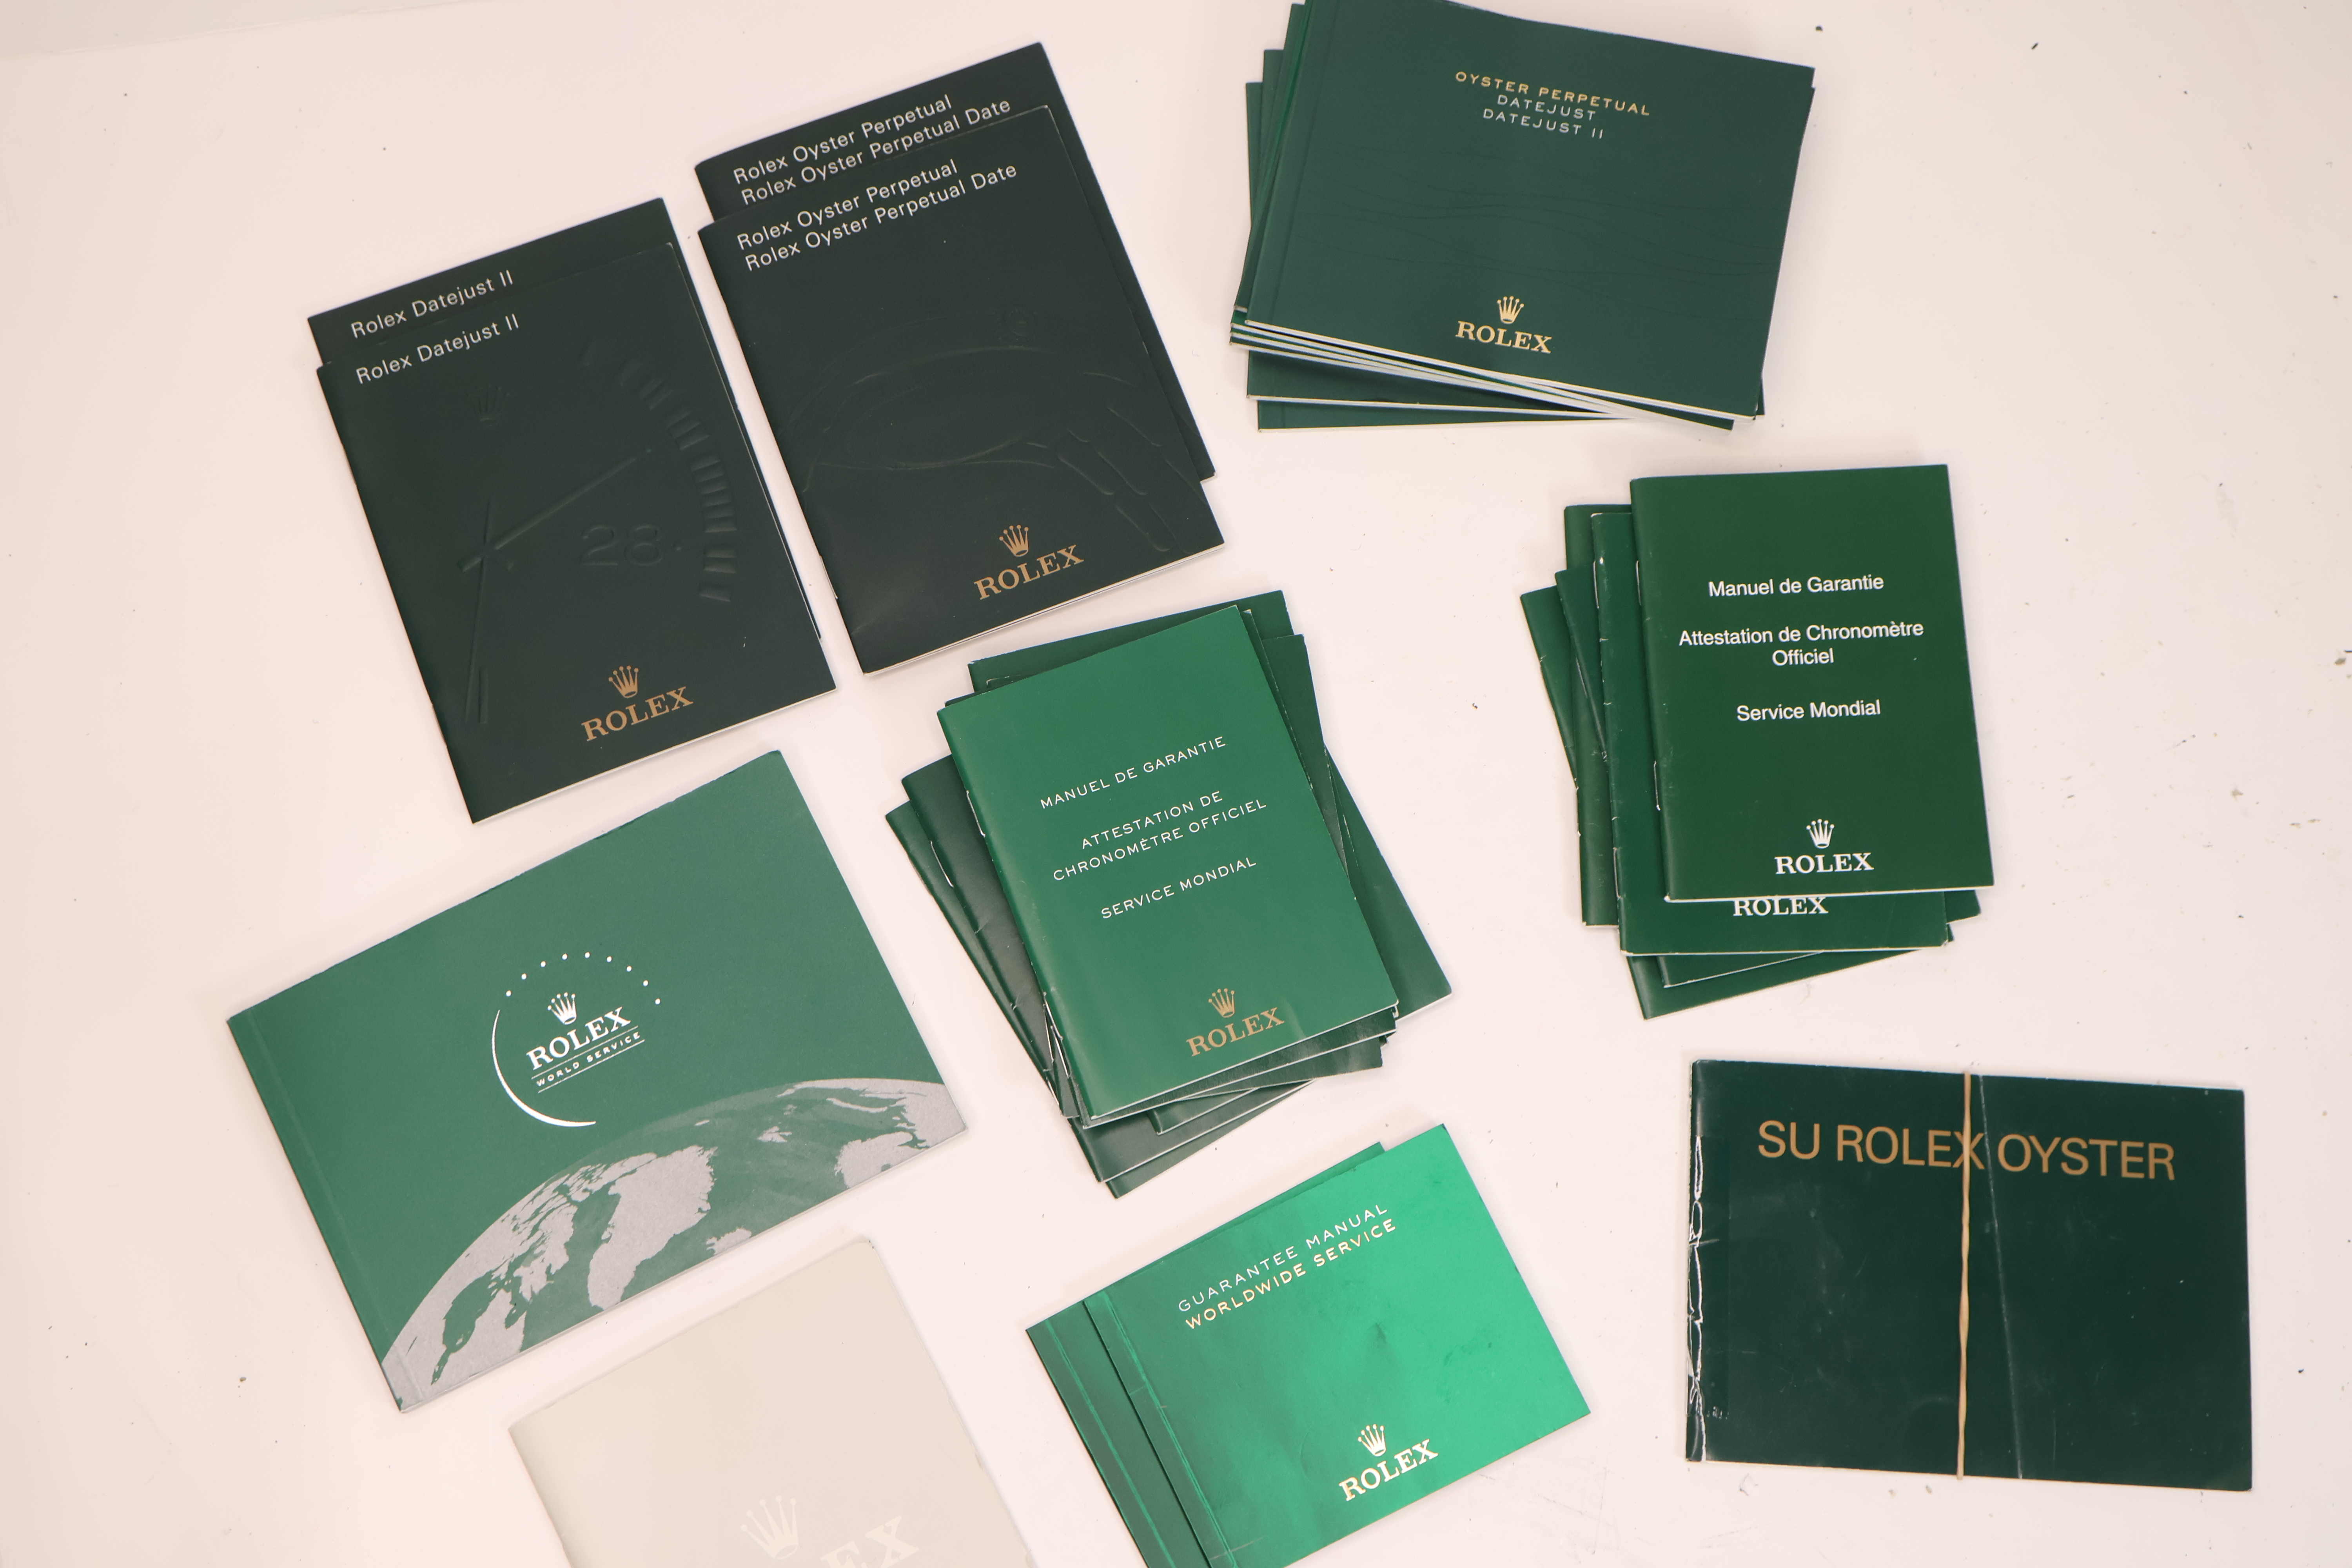 *To Be Sold Without Reserve* Rolex assorted booklets